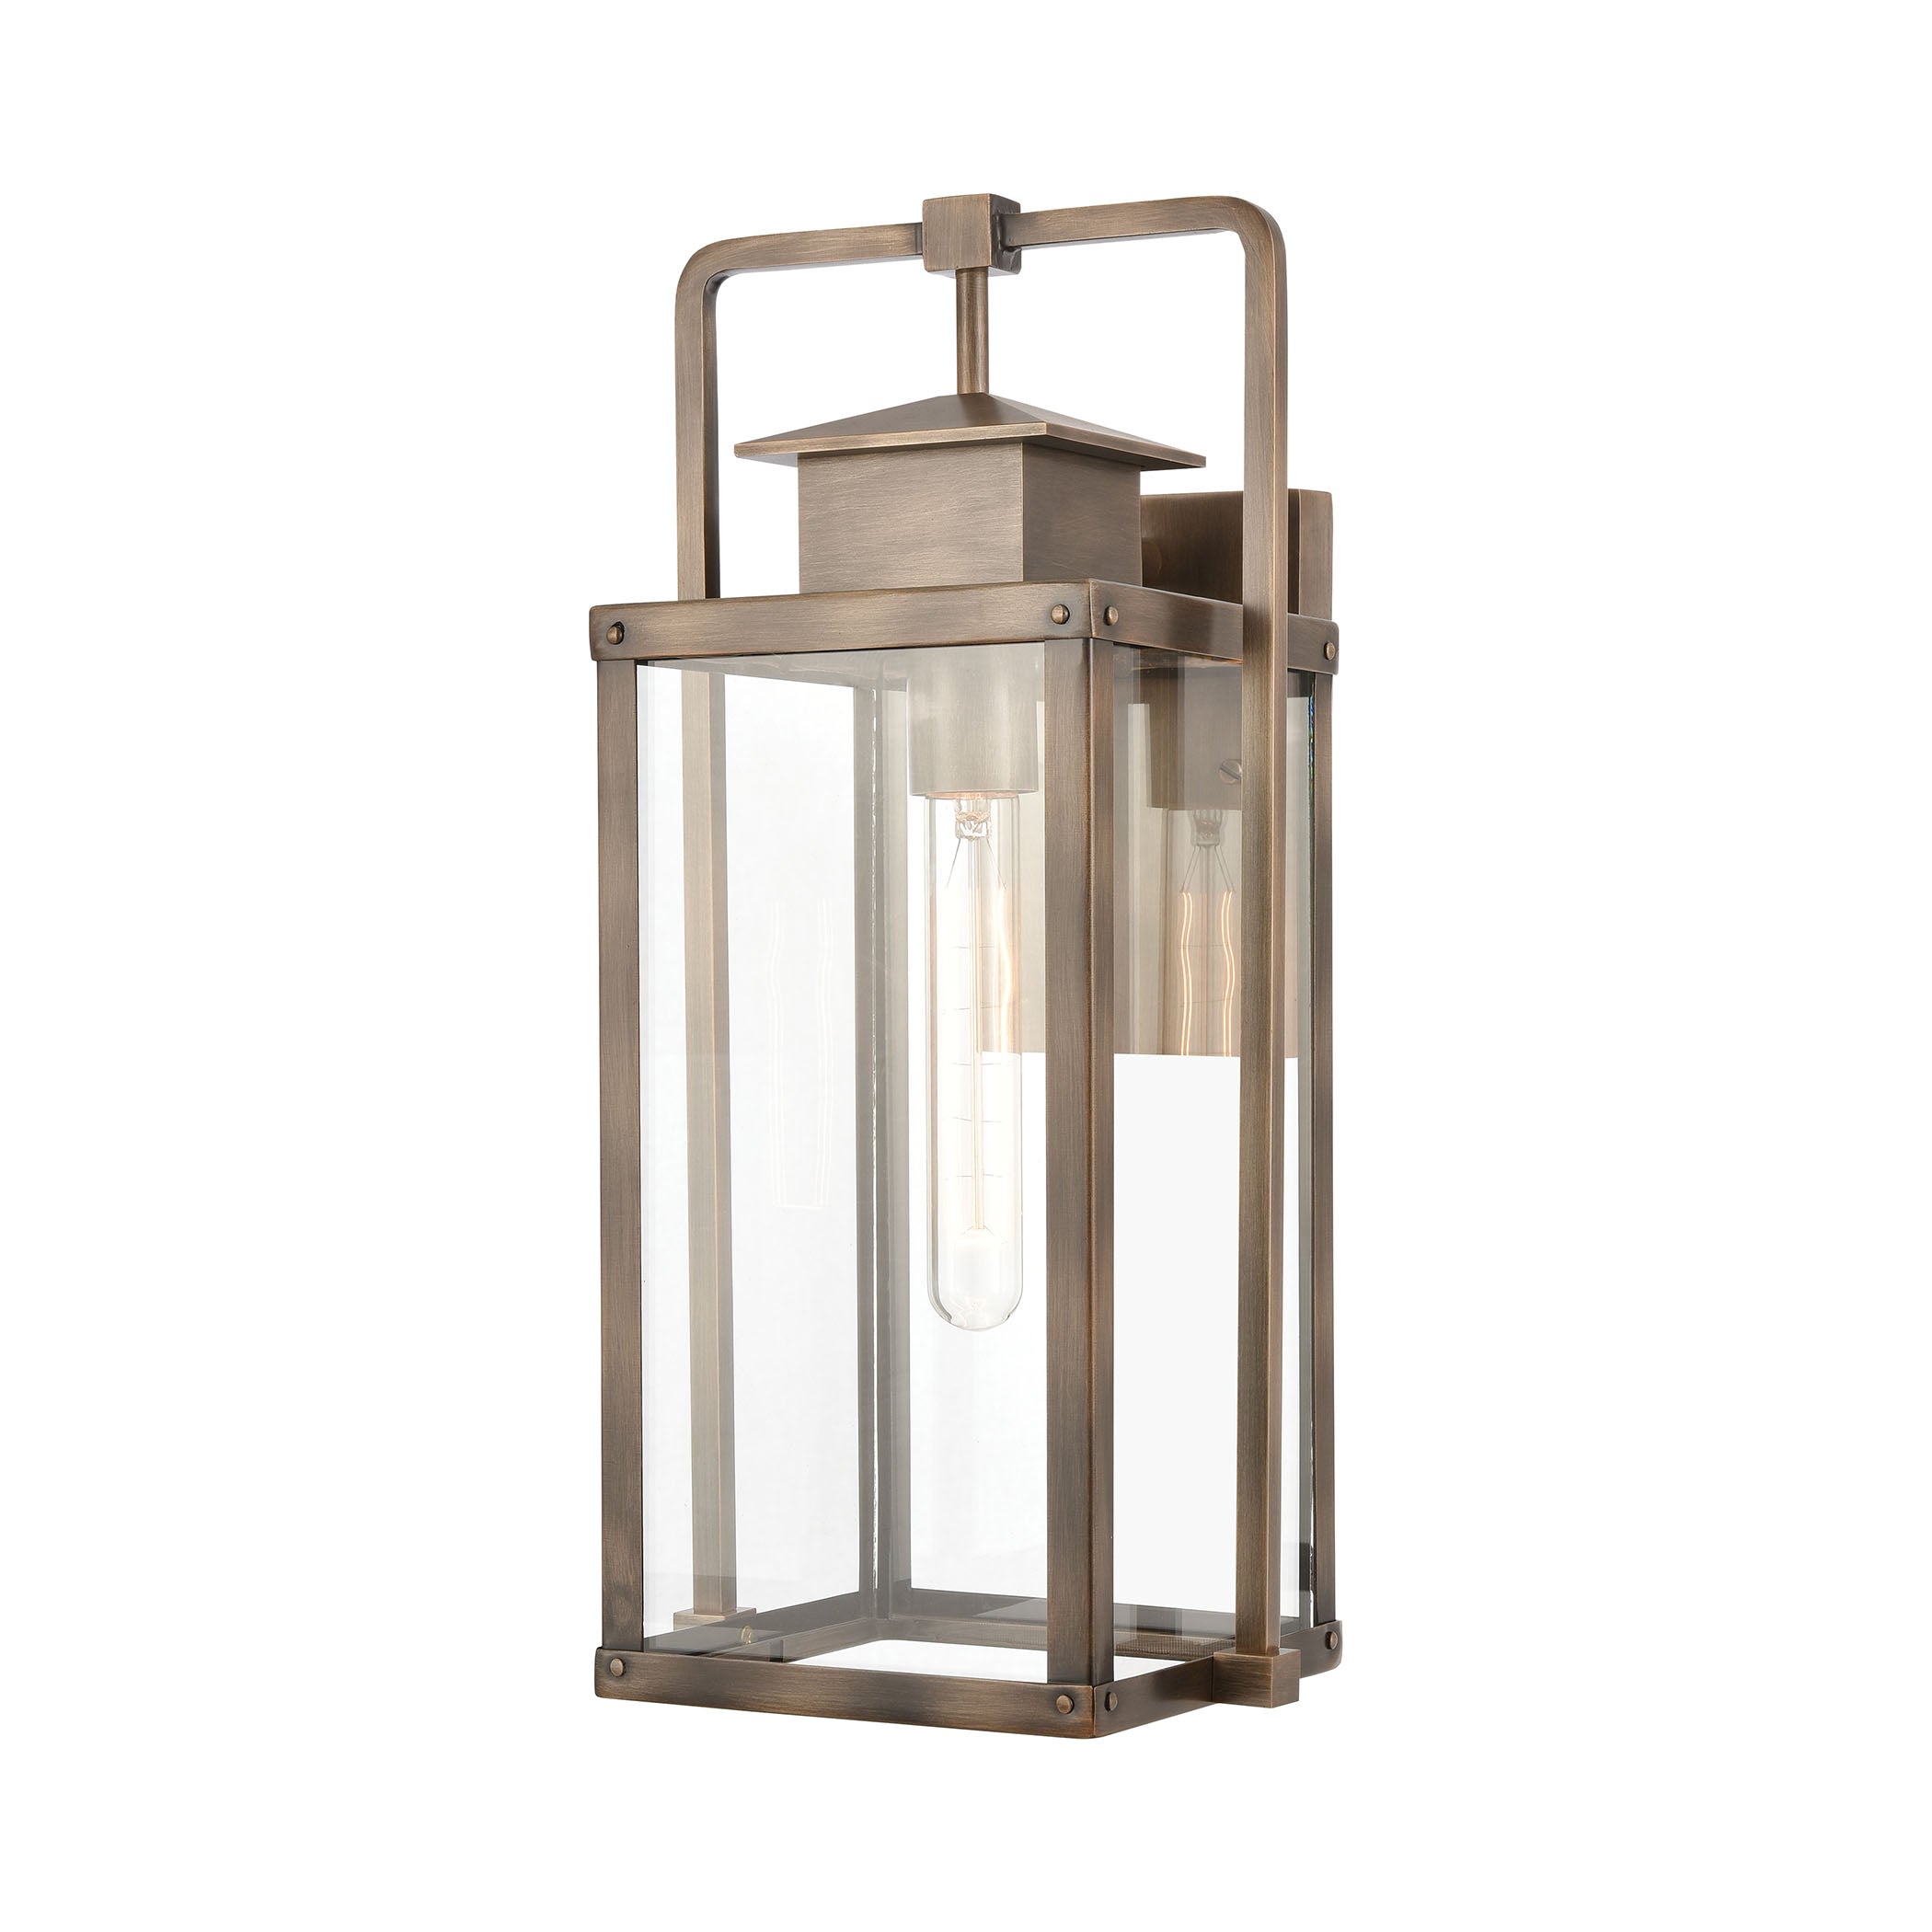 ELK Lighting 89182/1 Crested Butte 1-Light Outdoor Sconce in Vintage Brass with Clear Glass Enclosure